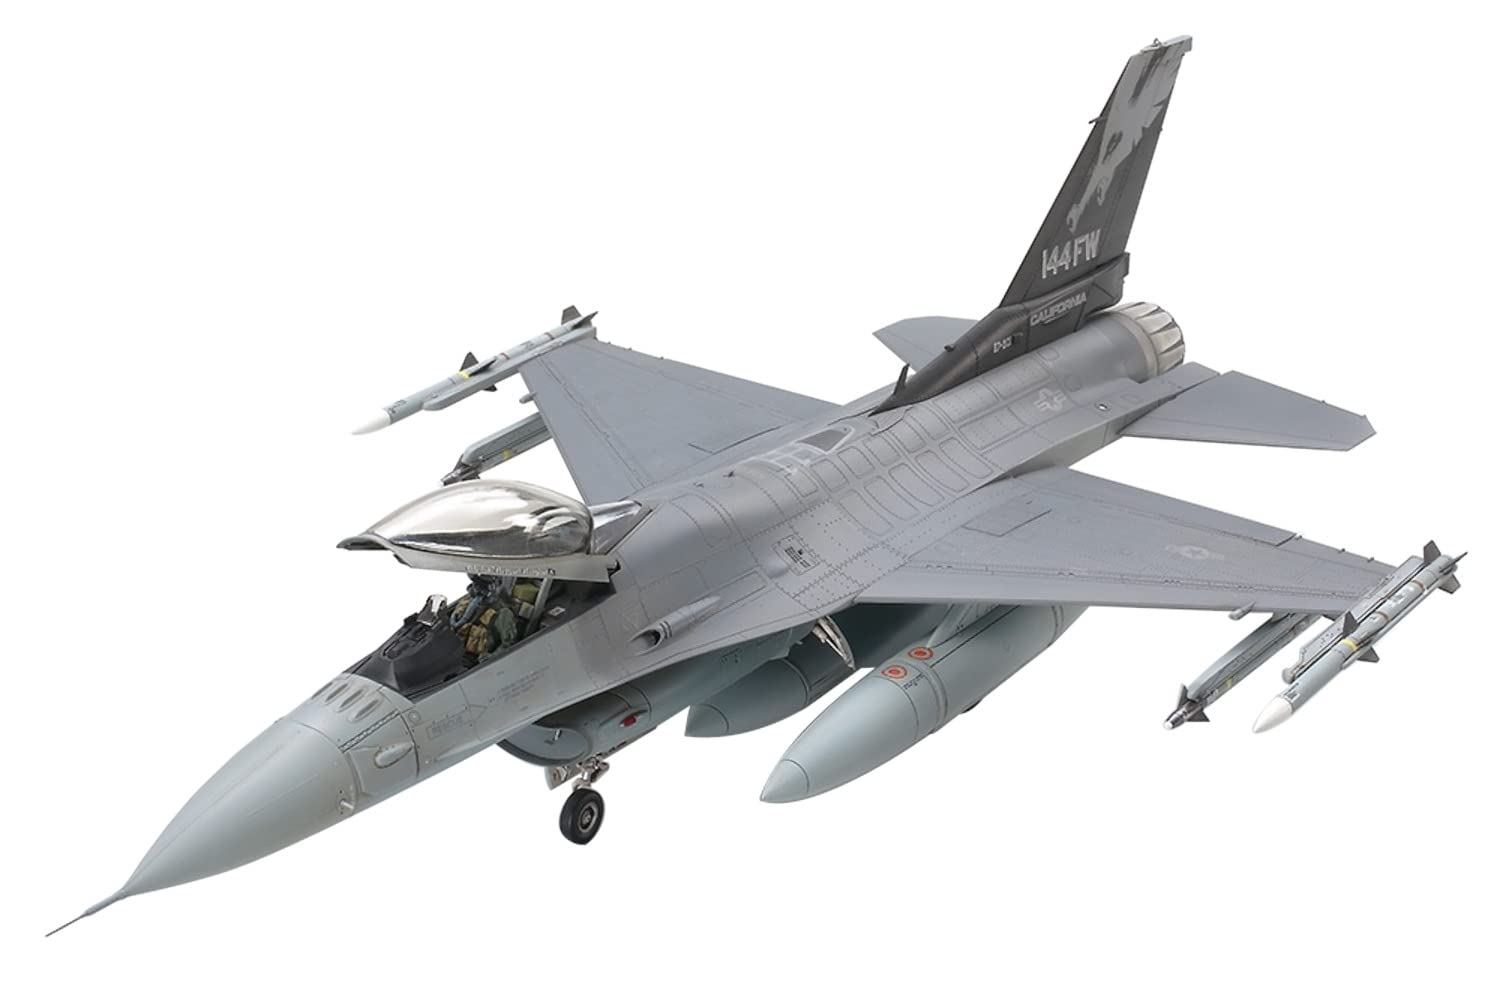 pas cher Tamiya - 61101 - Maquette - F-16C Block 25 / 32 Ang - Echelle 1:48 TYr0i06ng en France Online